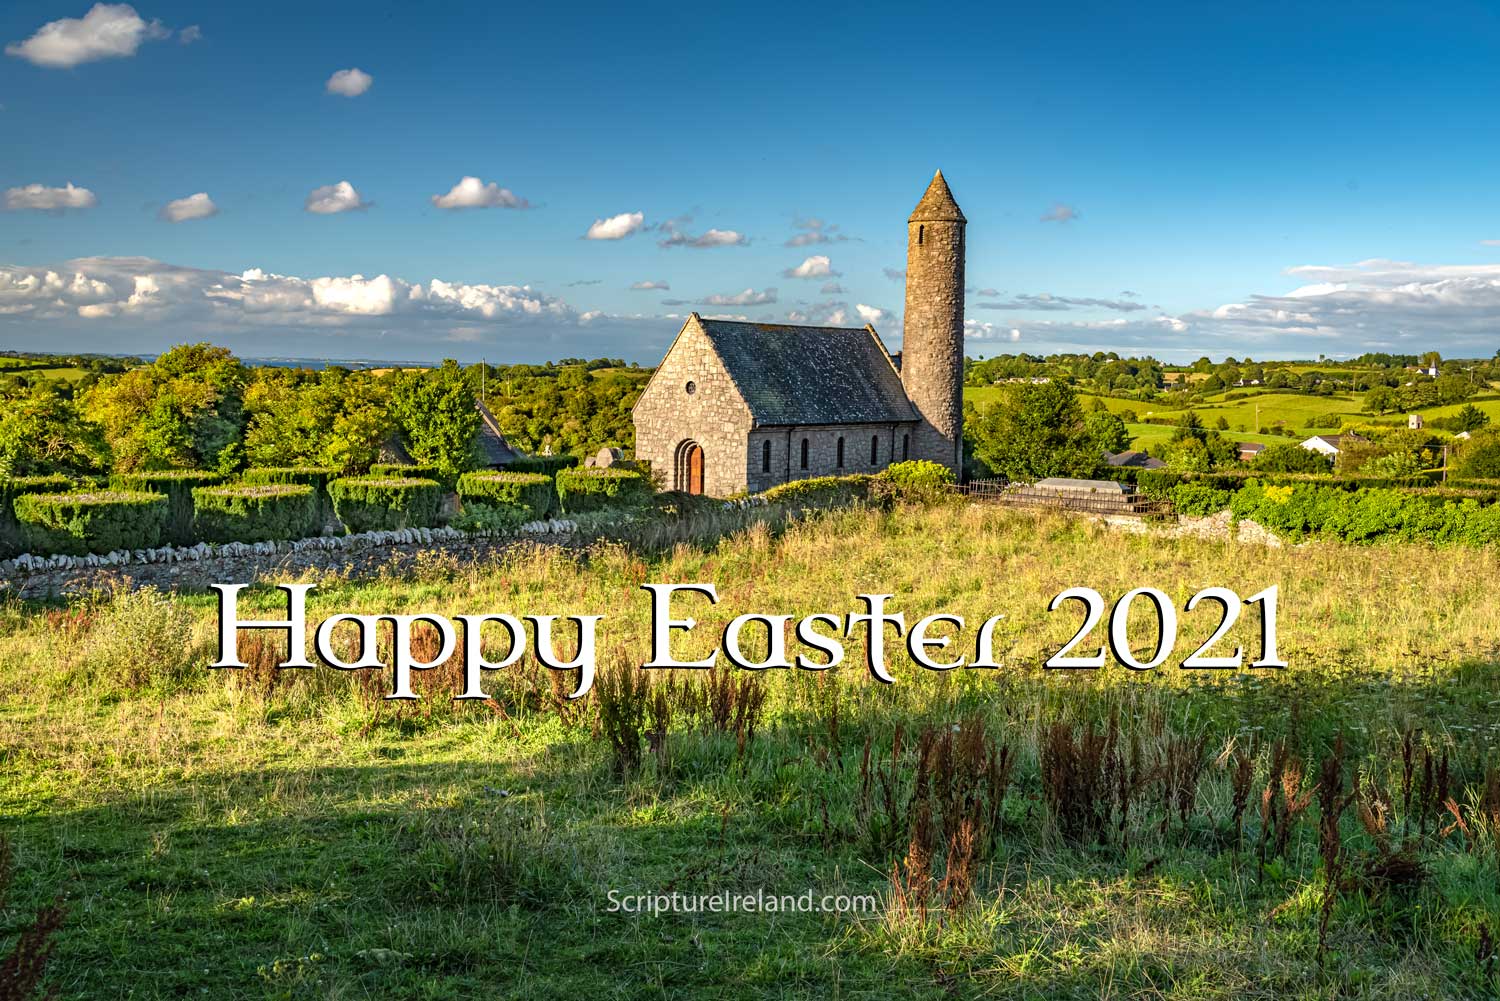 A Very Happy Easter to people of goodwill everywhere. The image above shows the site of the very first Christian church in Ireland, founded by St Patrick in 432AD, making this the oldest ecclesiastical site in Ireland. It’s located at Saul, County Down, in Northern Ireland, just a few miles from where St Patrick’s remains are buried at Down Church of Ireland Cathedral, Downpatrick.